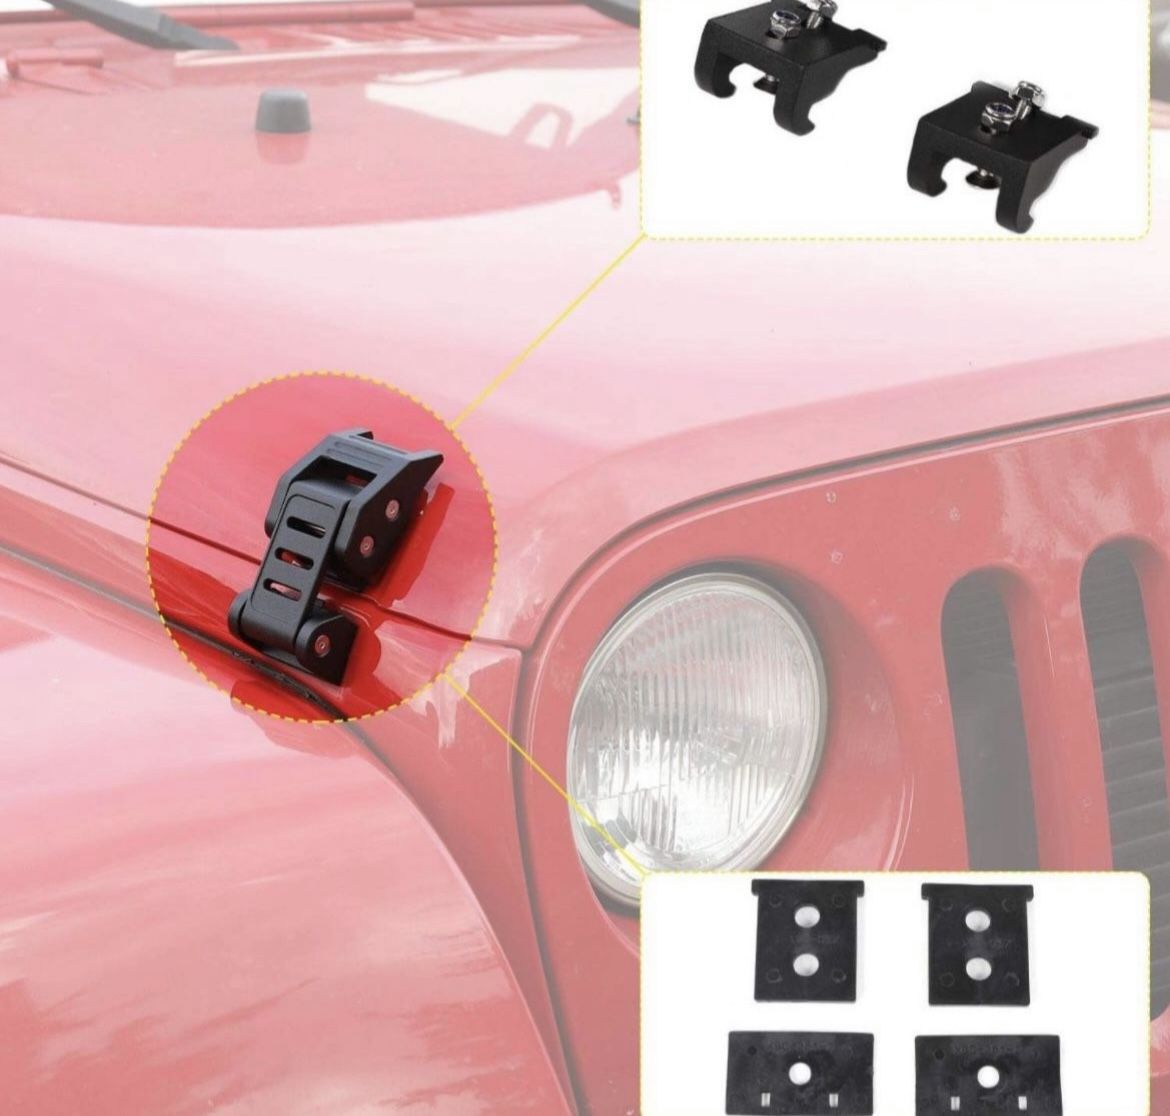 Jeep Wrangler JK Hood Latches Stainless Steel Hood Lock Hood Catch Kit for Jeep Wrangler JK JKU 2007-2018